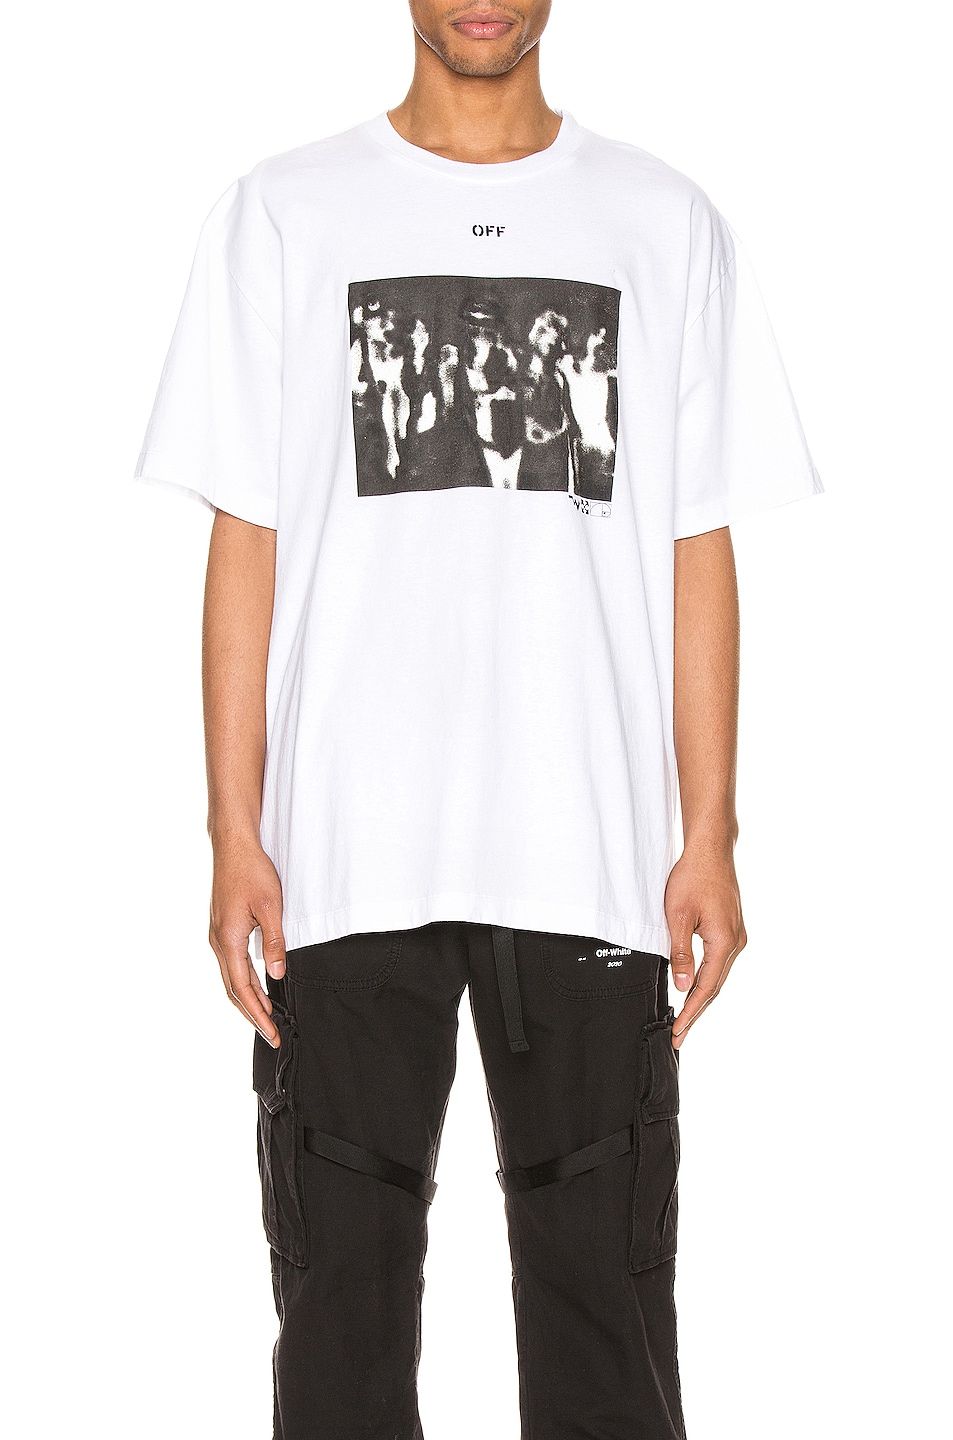 Image 1 of OFF-WHITE Spray Painting Over Tee in White & Black